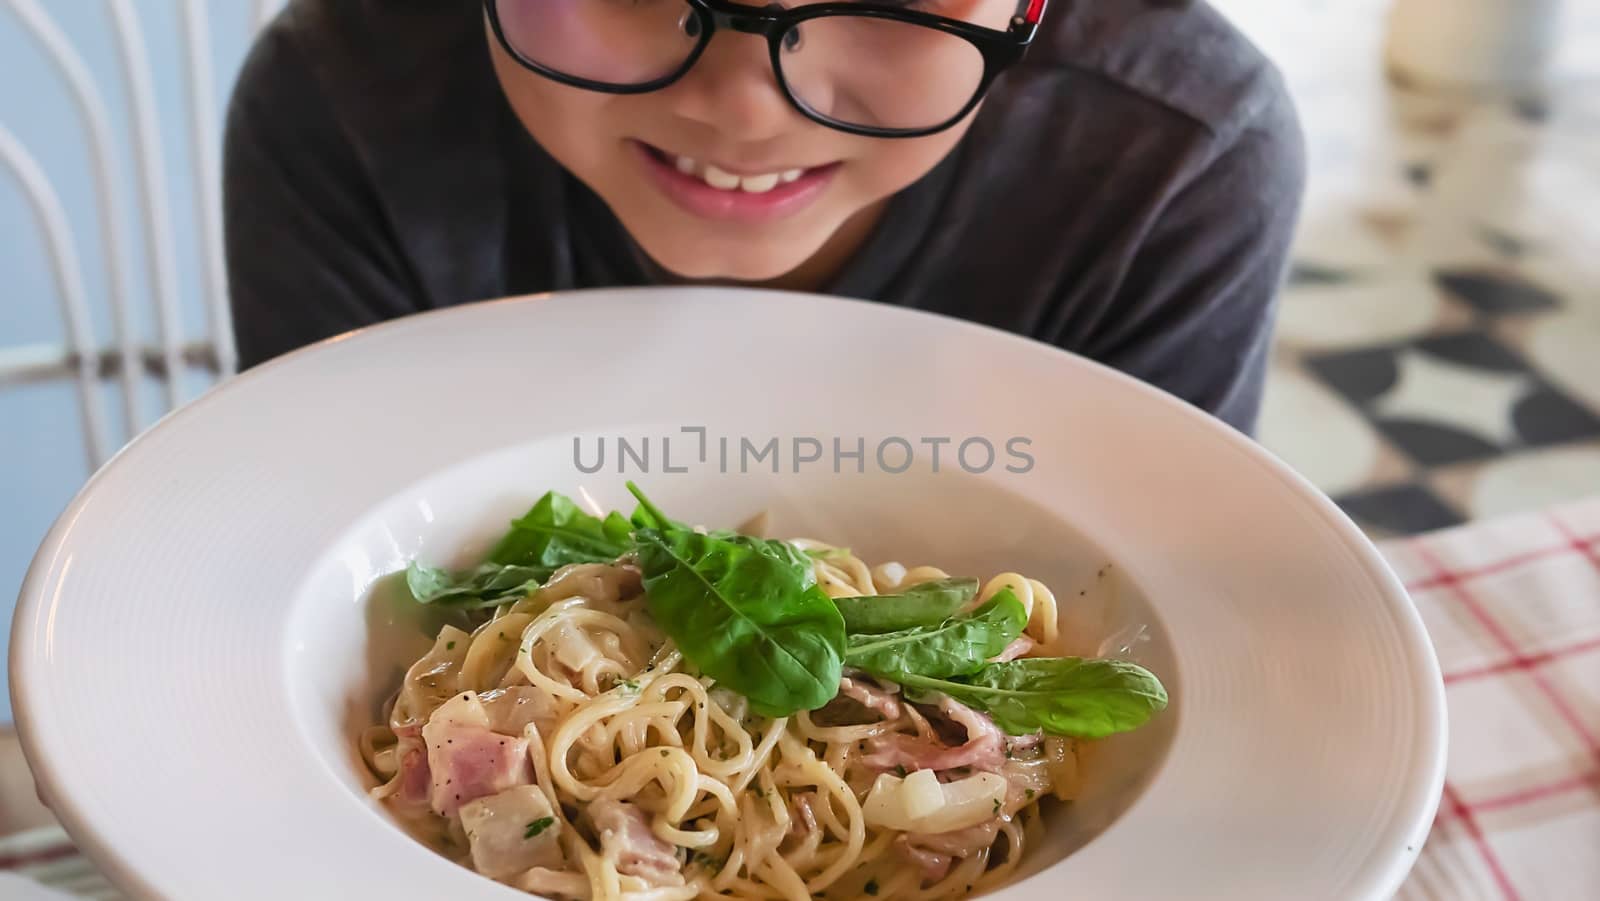 Boy happy eating spaghetti carbonara recipe - people enjoy with famous Italian dish food concept by pairhandmade